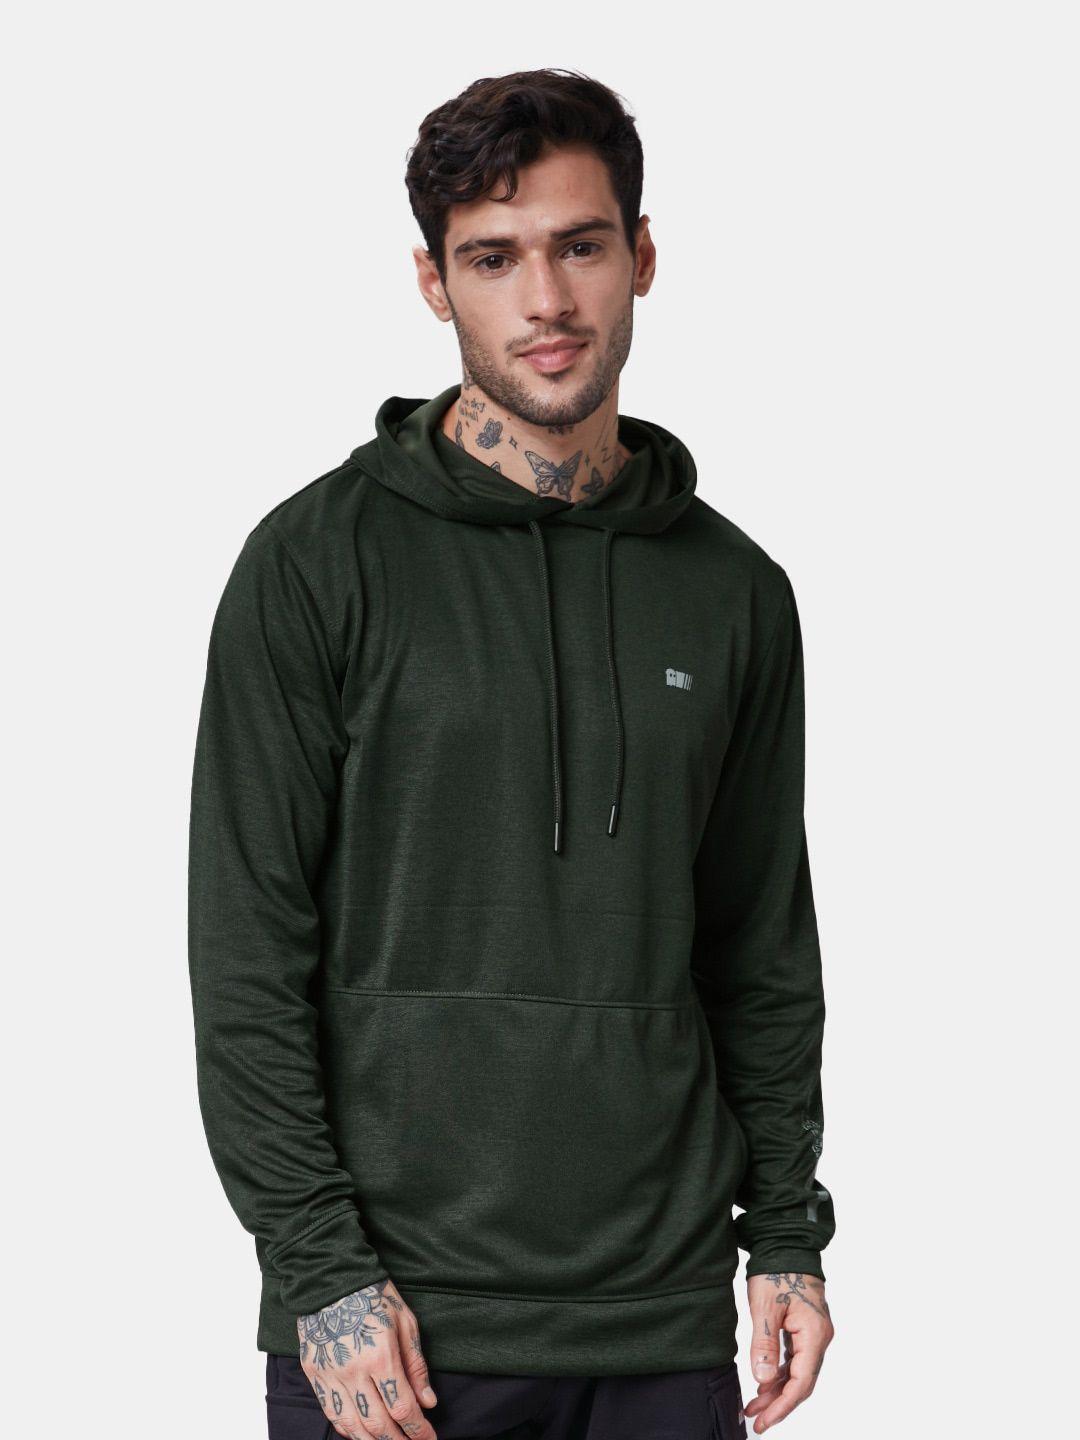 the souled store hooded pullover sweatshirt